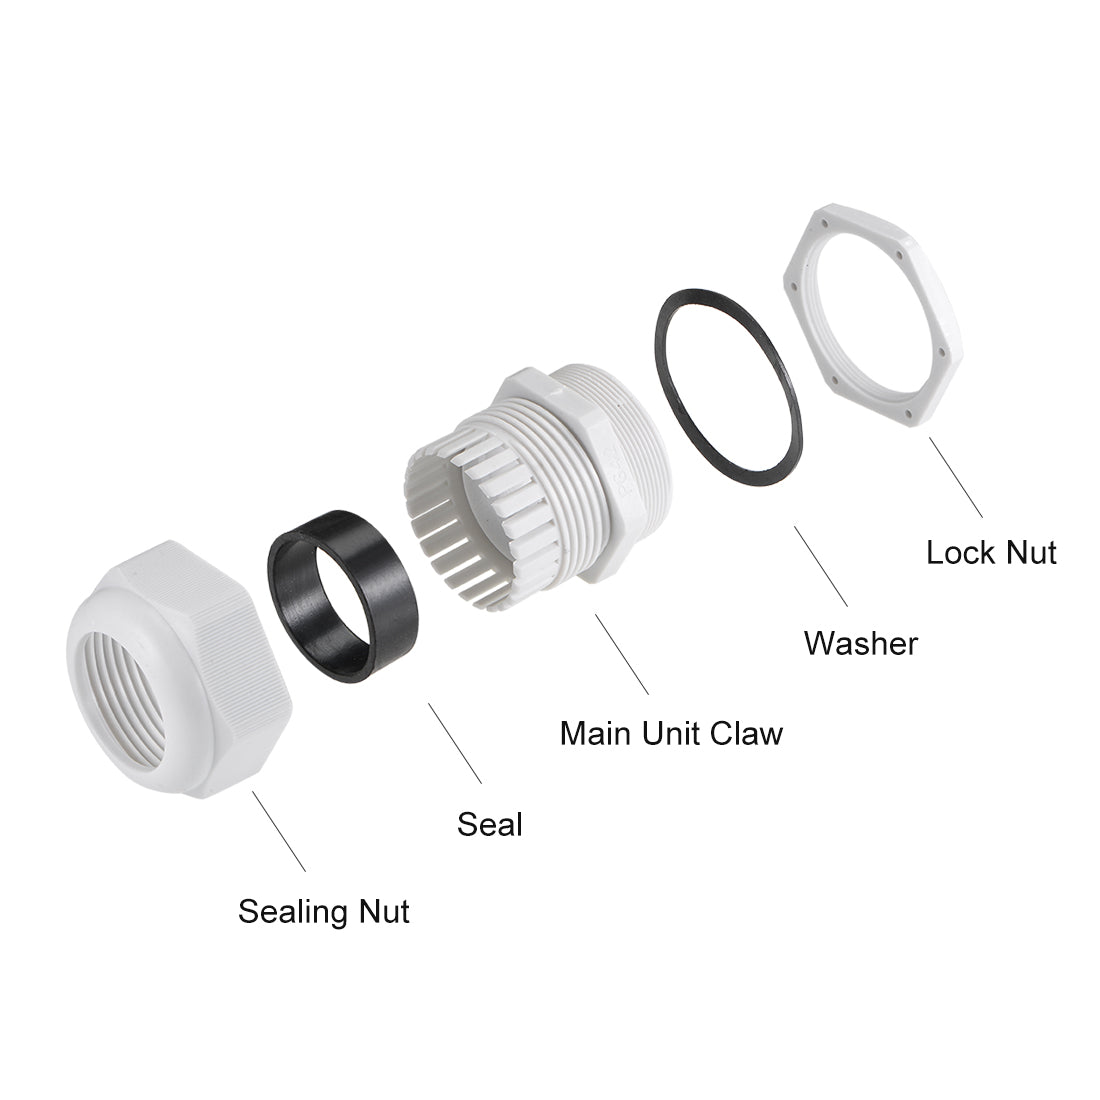 uxcell Uxcell PG42 Cable Gland 32mm-38mm Wire Hole Waterproof Nylon Joint Adjustable Locknut with Washer White 6pcs